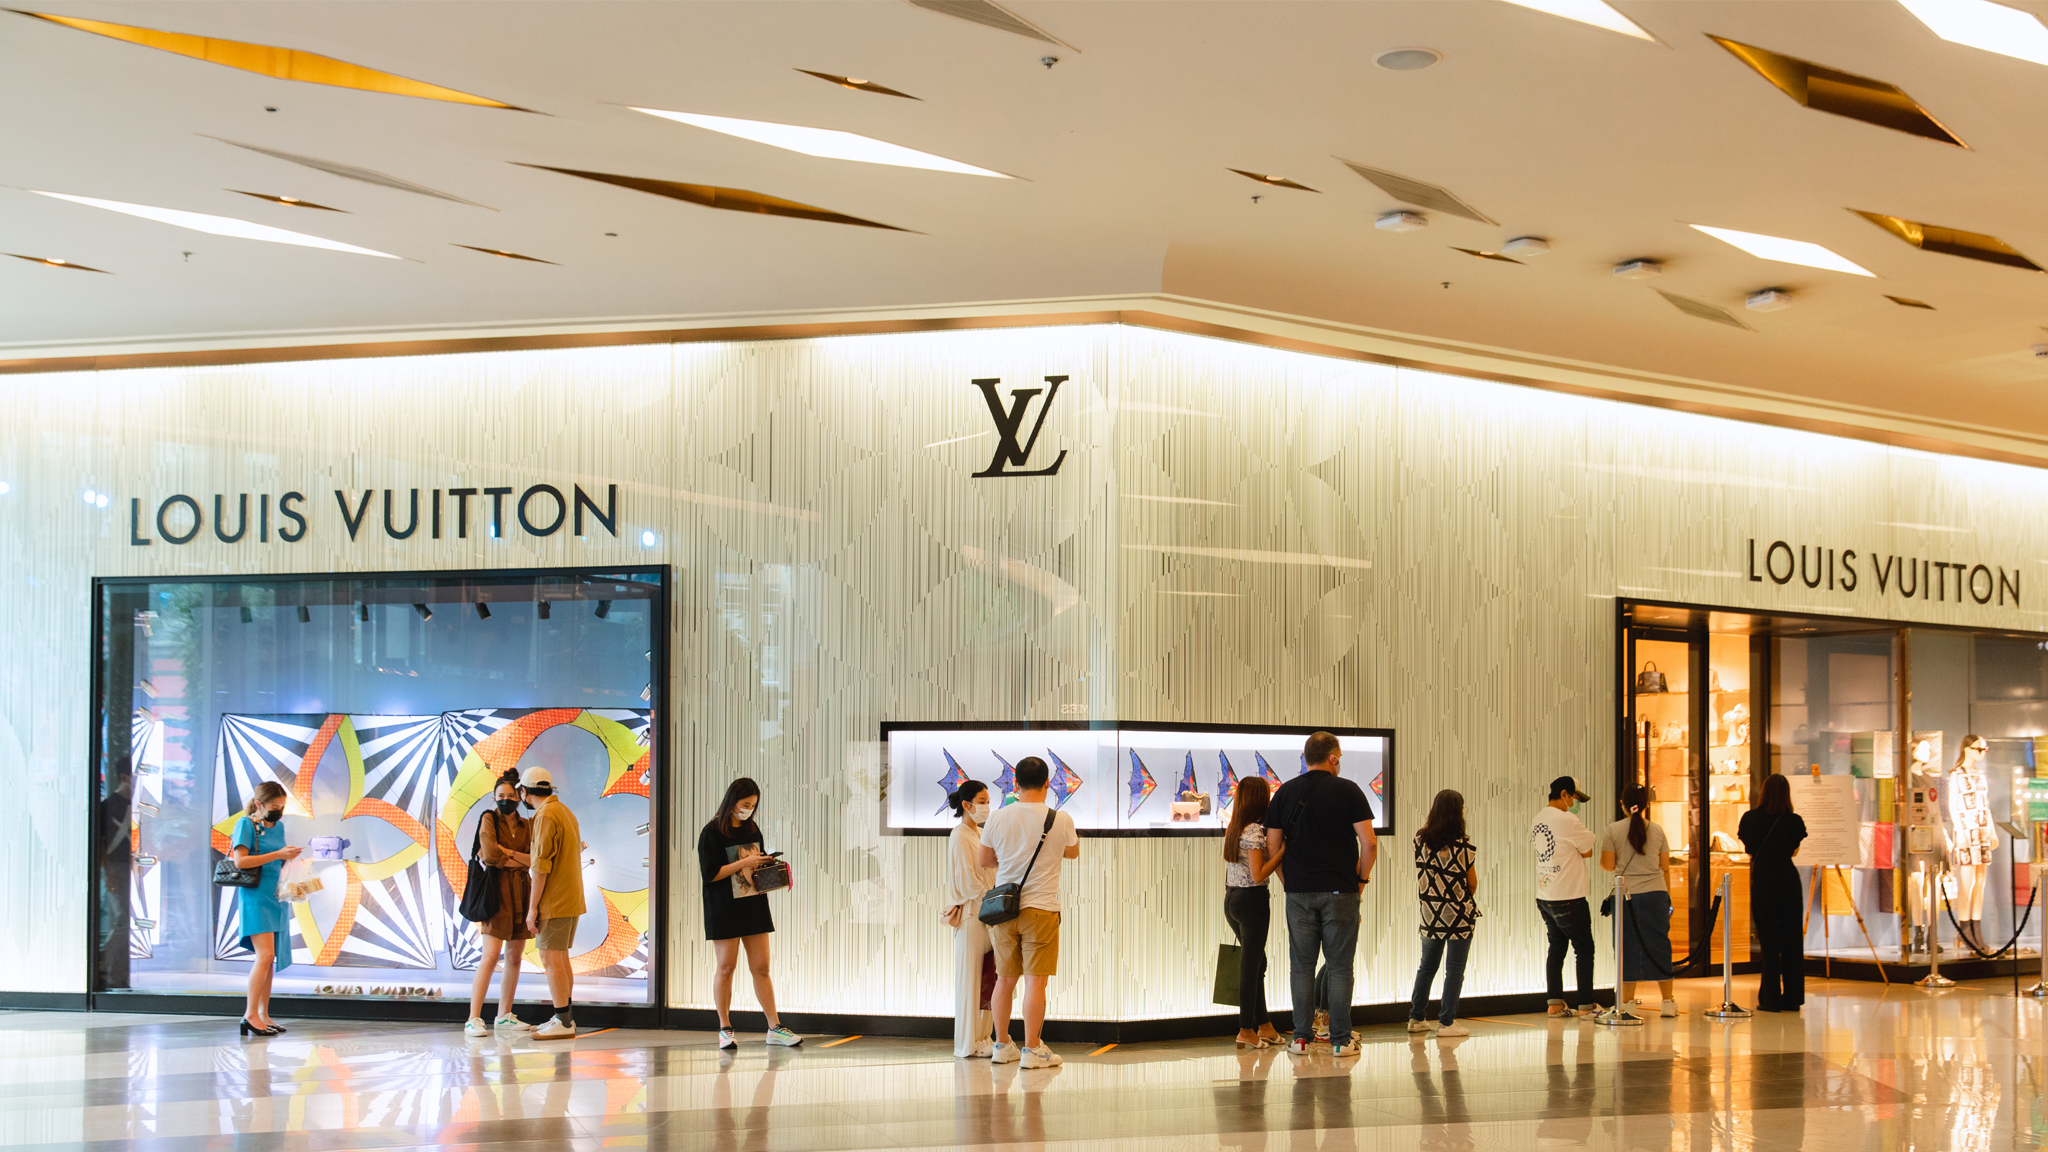 Chinese Tourists Queue in Front of Louis Vuitton, Bangkok, Thailand  Editorial Photography - Image of culture, asia: 134456837